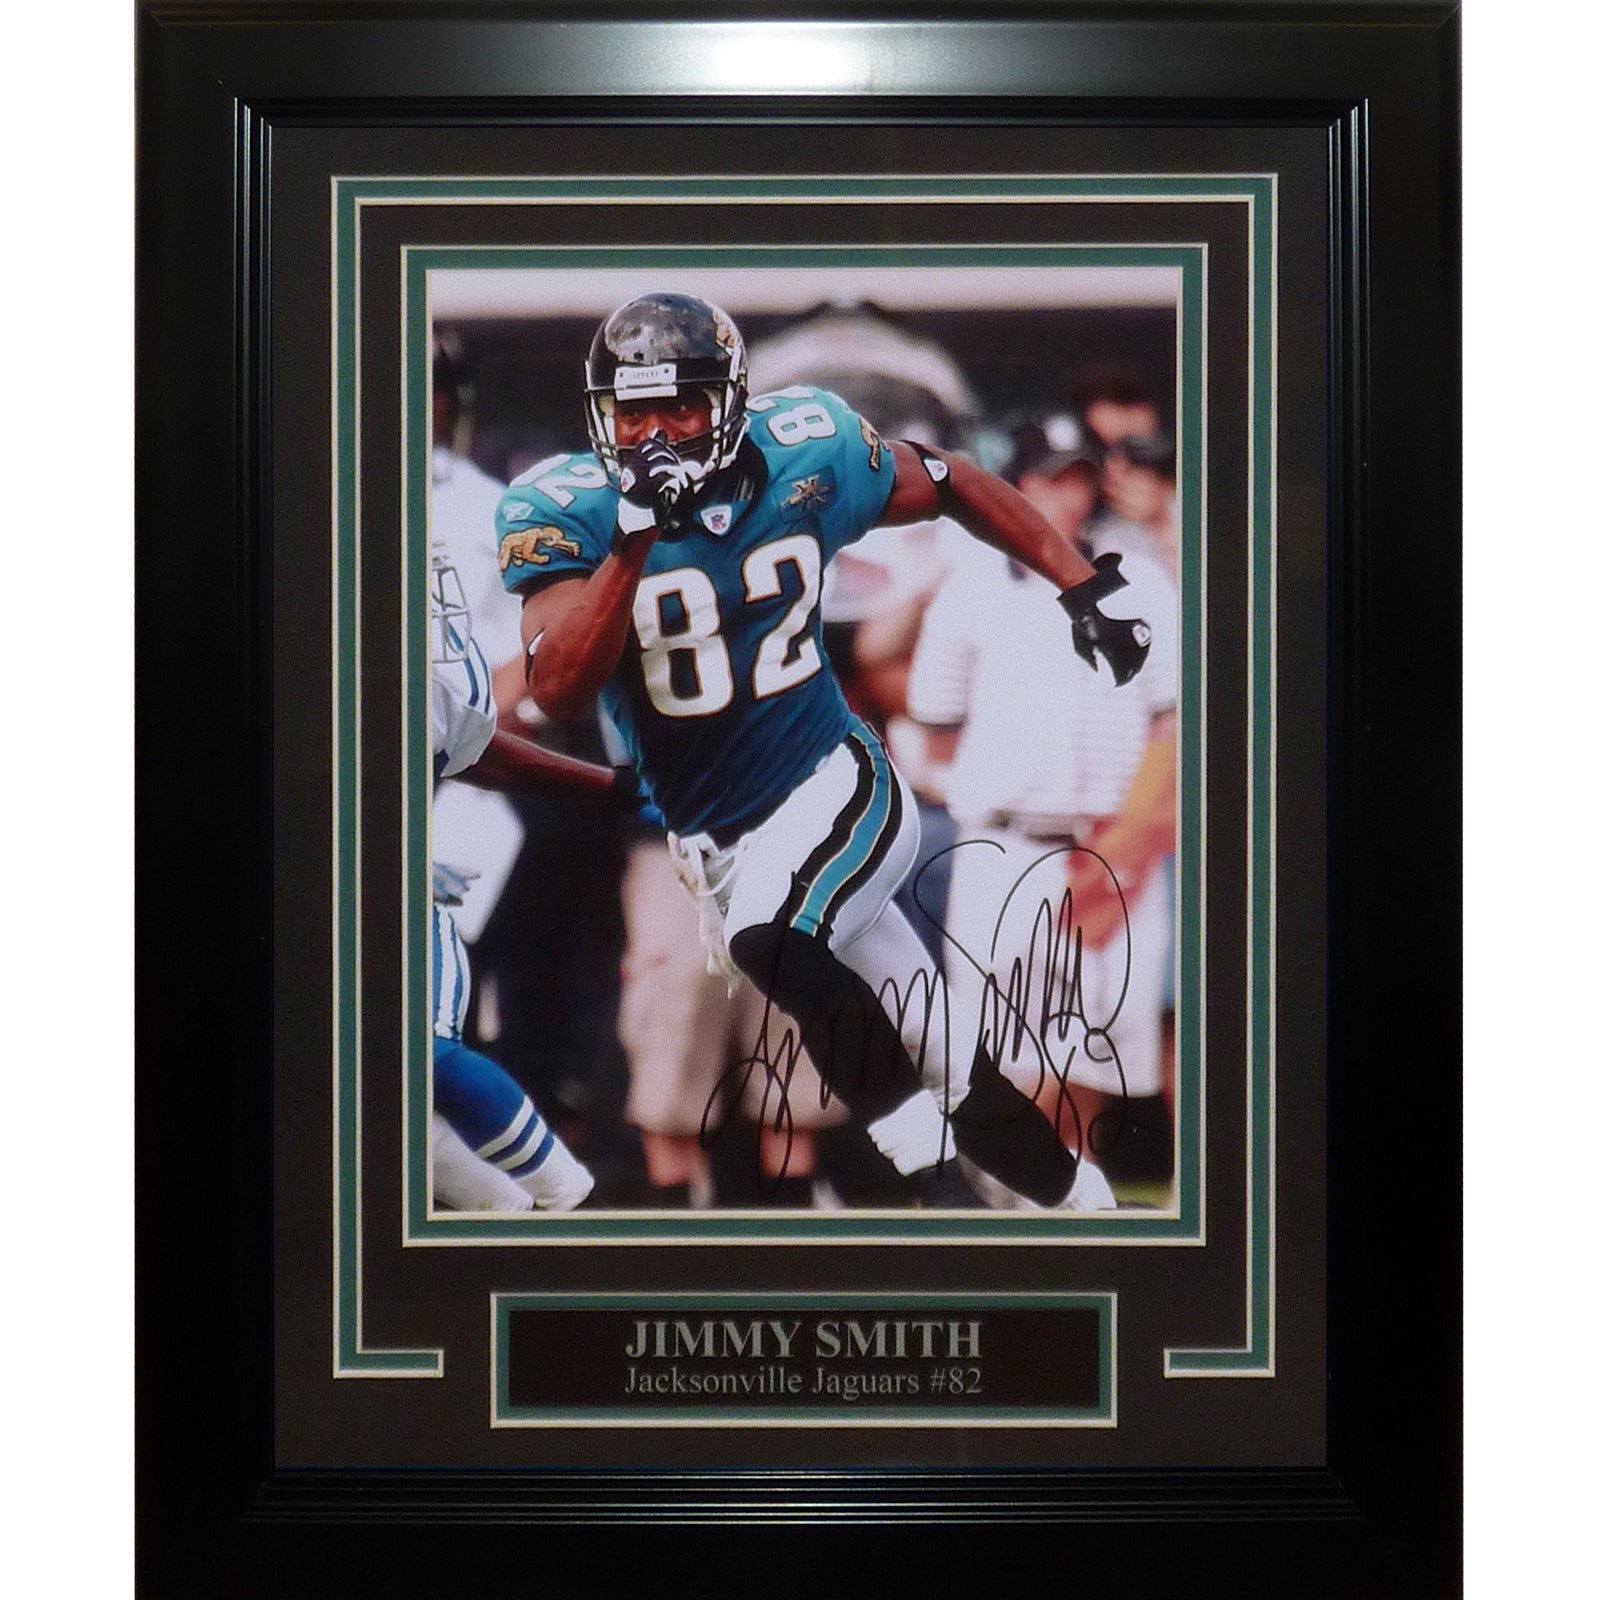 Jimmy Smith Autographed Jacksonville Jaguars Deluxe Framed 8x10 Photo